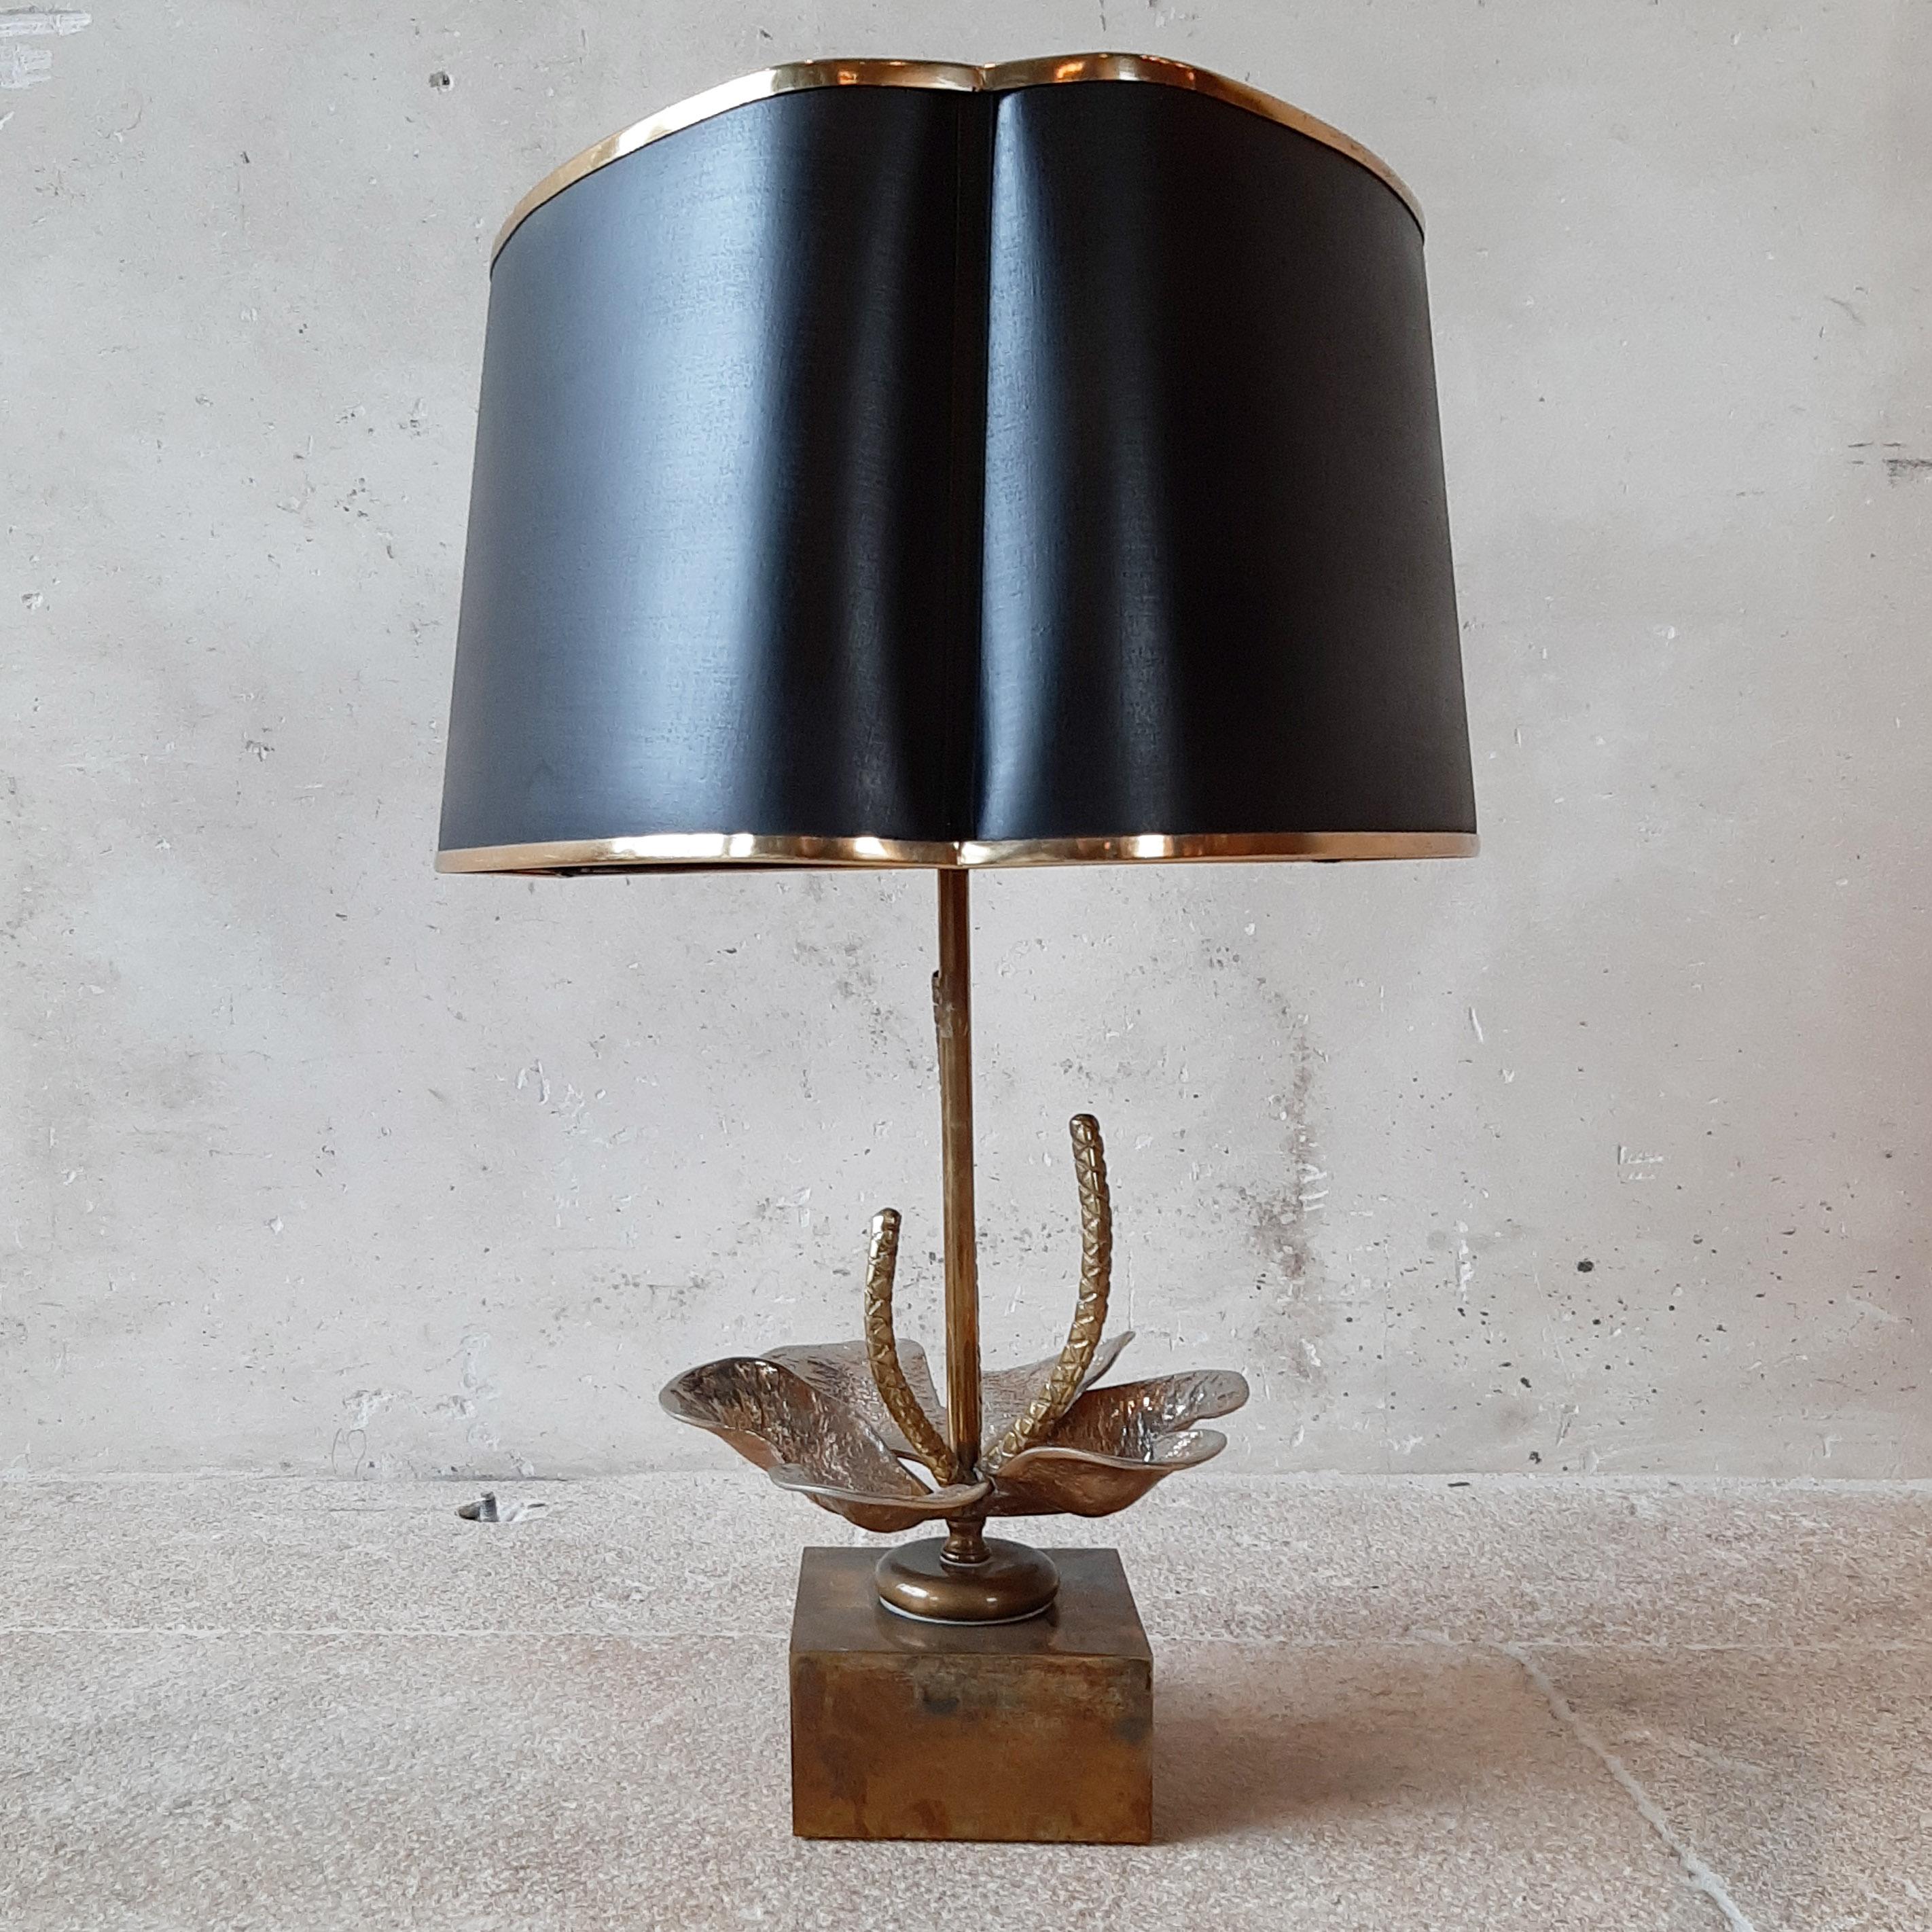 Midcentury Hollywood Regency style Maison Charles Nenuphar table lamp, 1960s. A beautiful copper base in the shape of a water lily, with the original organically shaped black shade with gold rim.

Dimensions: Ø 33 x H 60 cm.